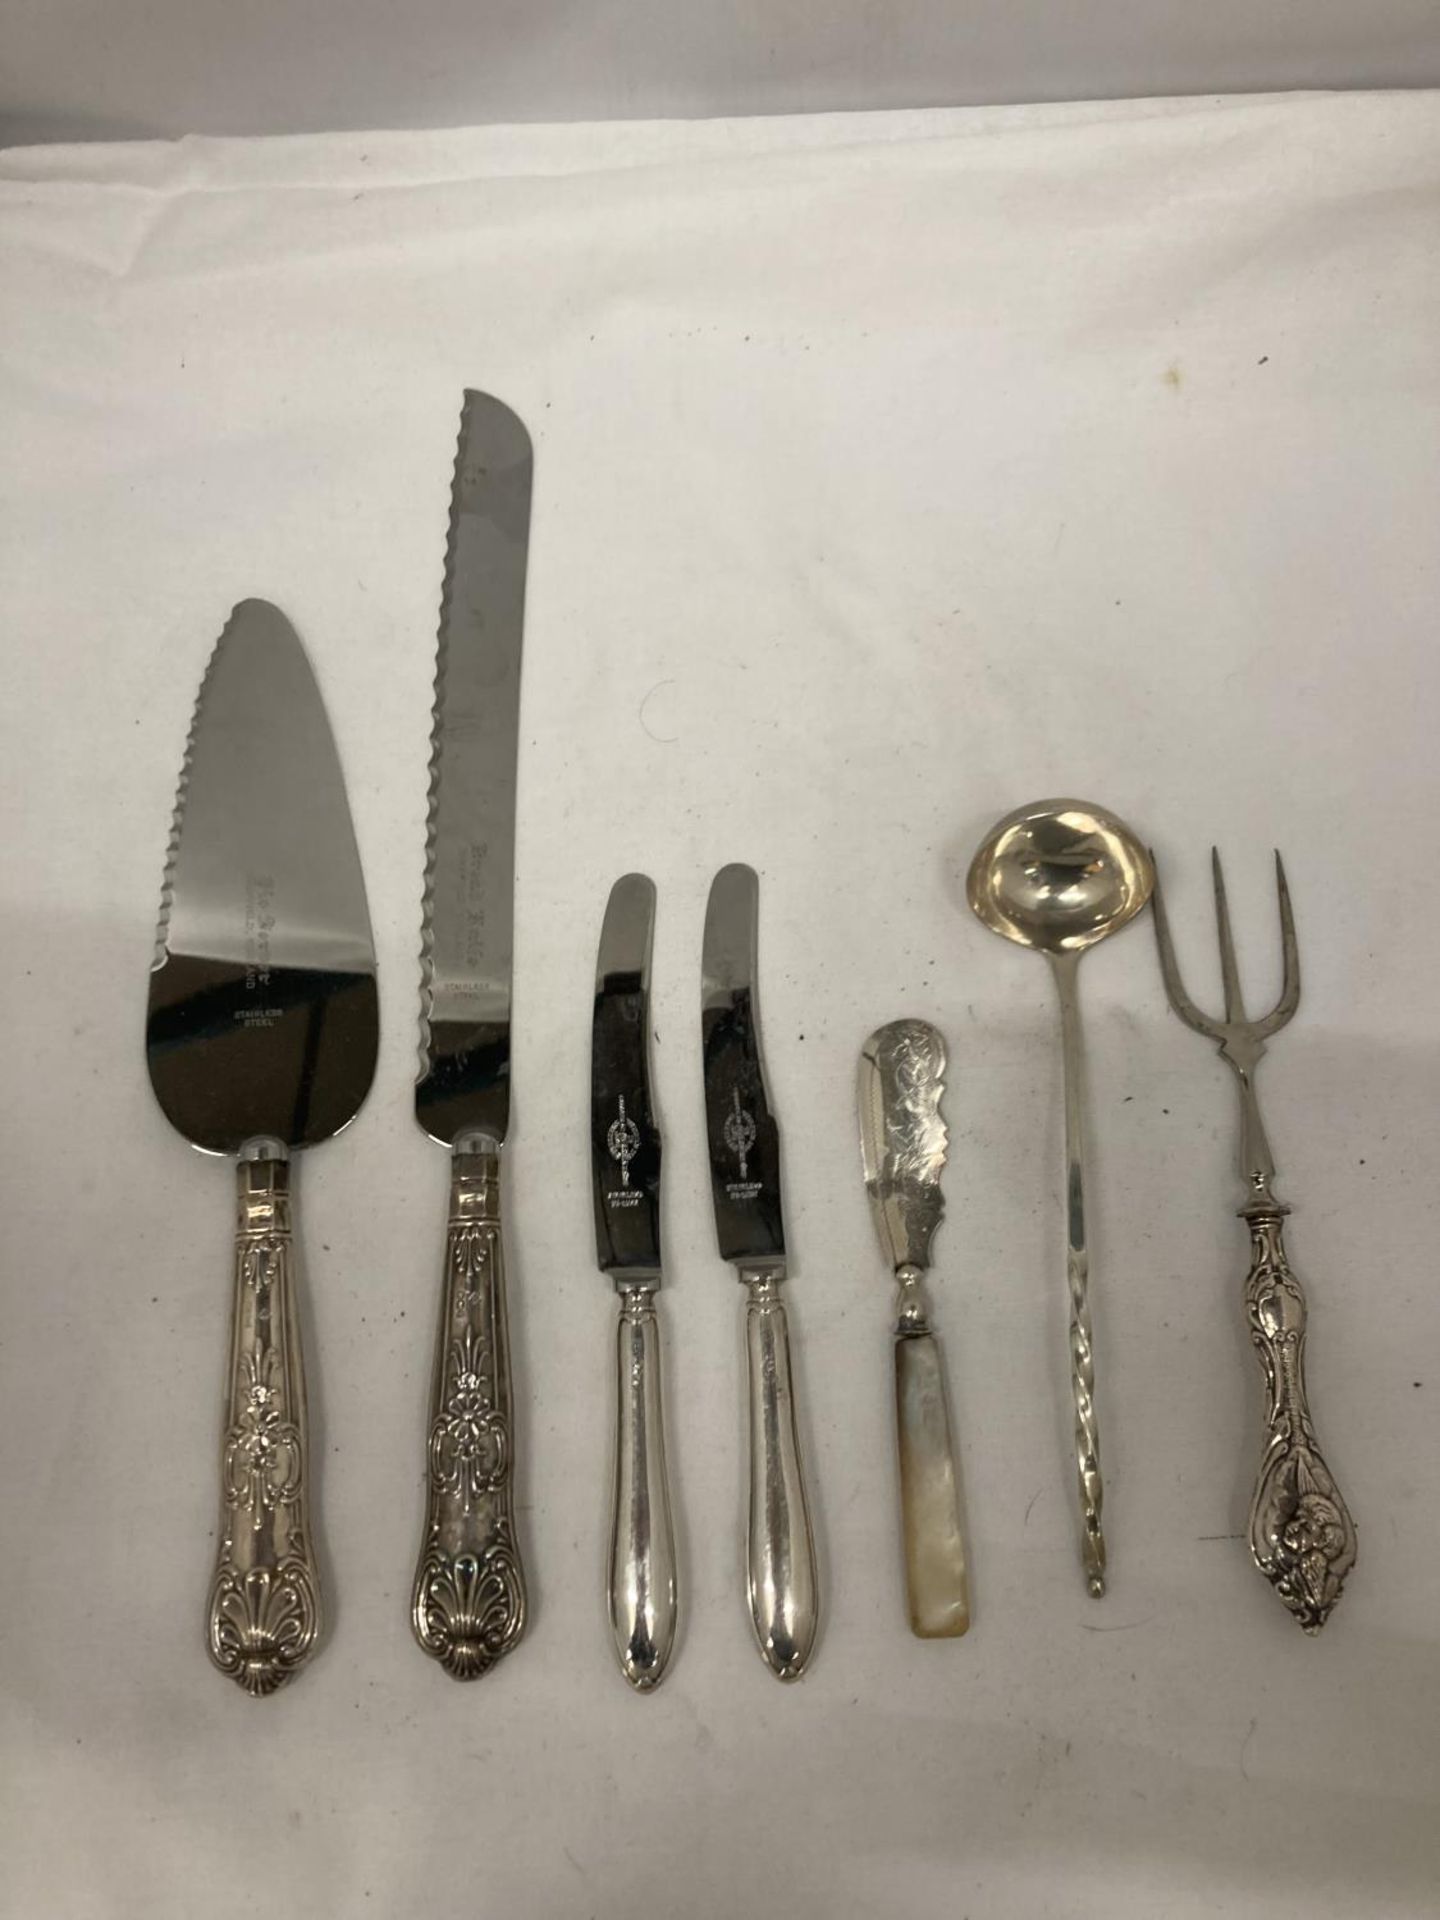 SEVEN SILVER ITEMS TO INCLUDE HALLMARKED SHEFFIELD SILVER HANDLED KNIFE AND CAKE SLICE, A GEORGIAN